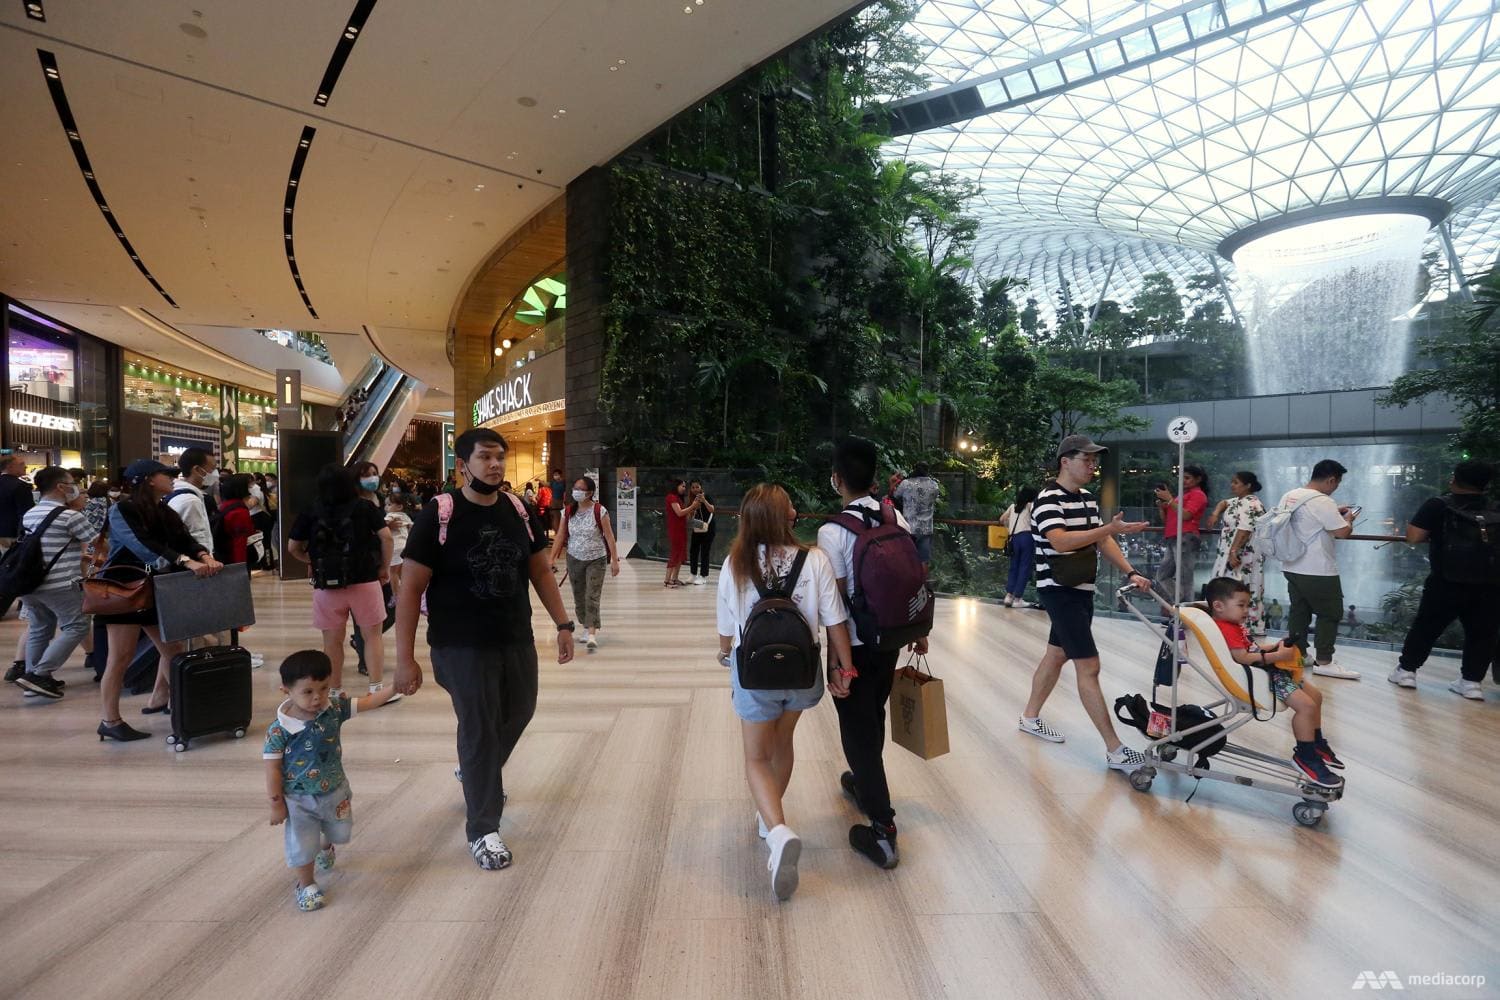 Shoppers' paradise lost? Singapore's malls suffer as locals